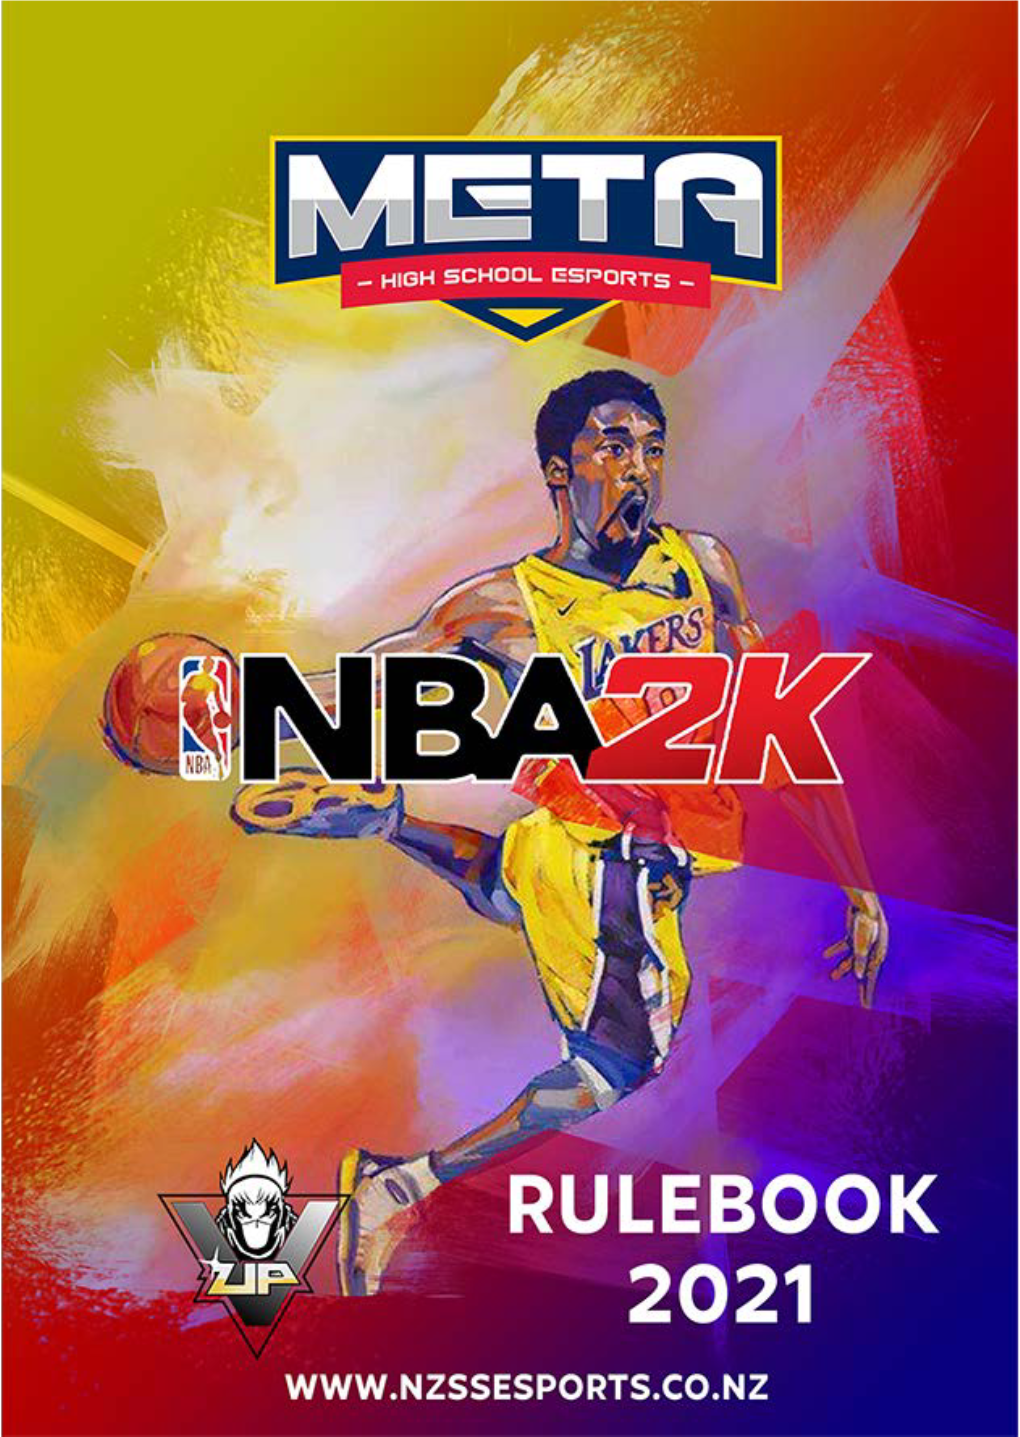 To See the NBA 2K21 Rulebook